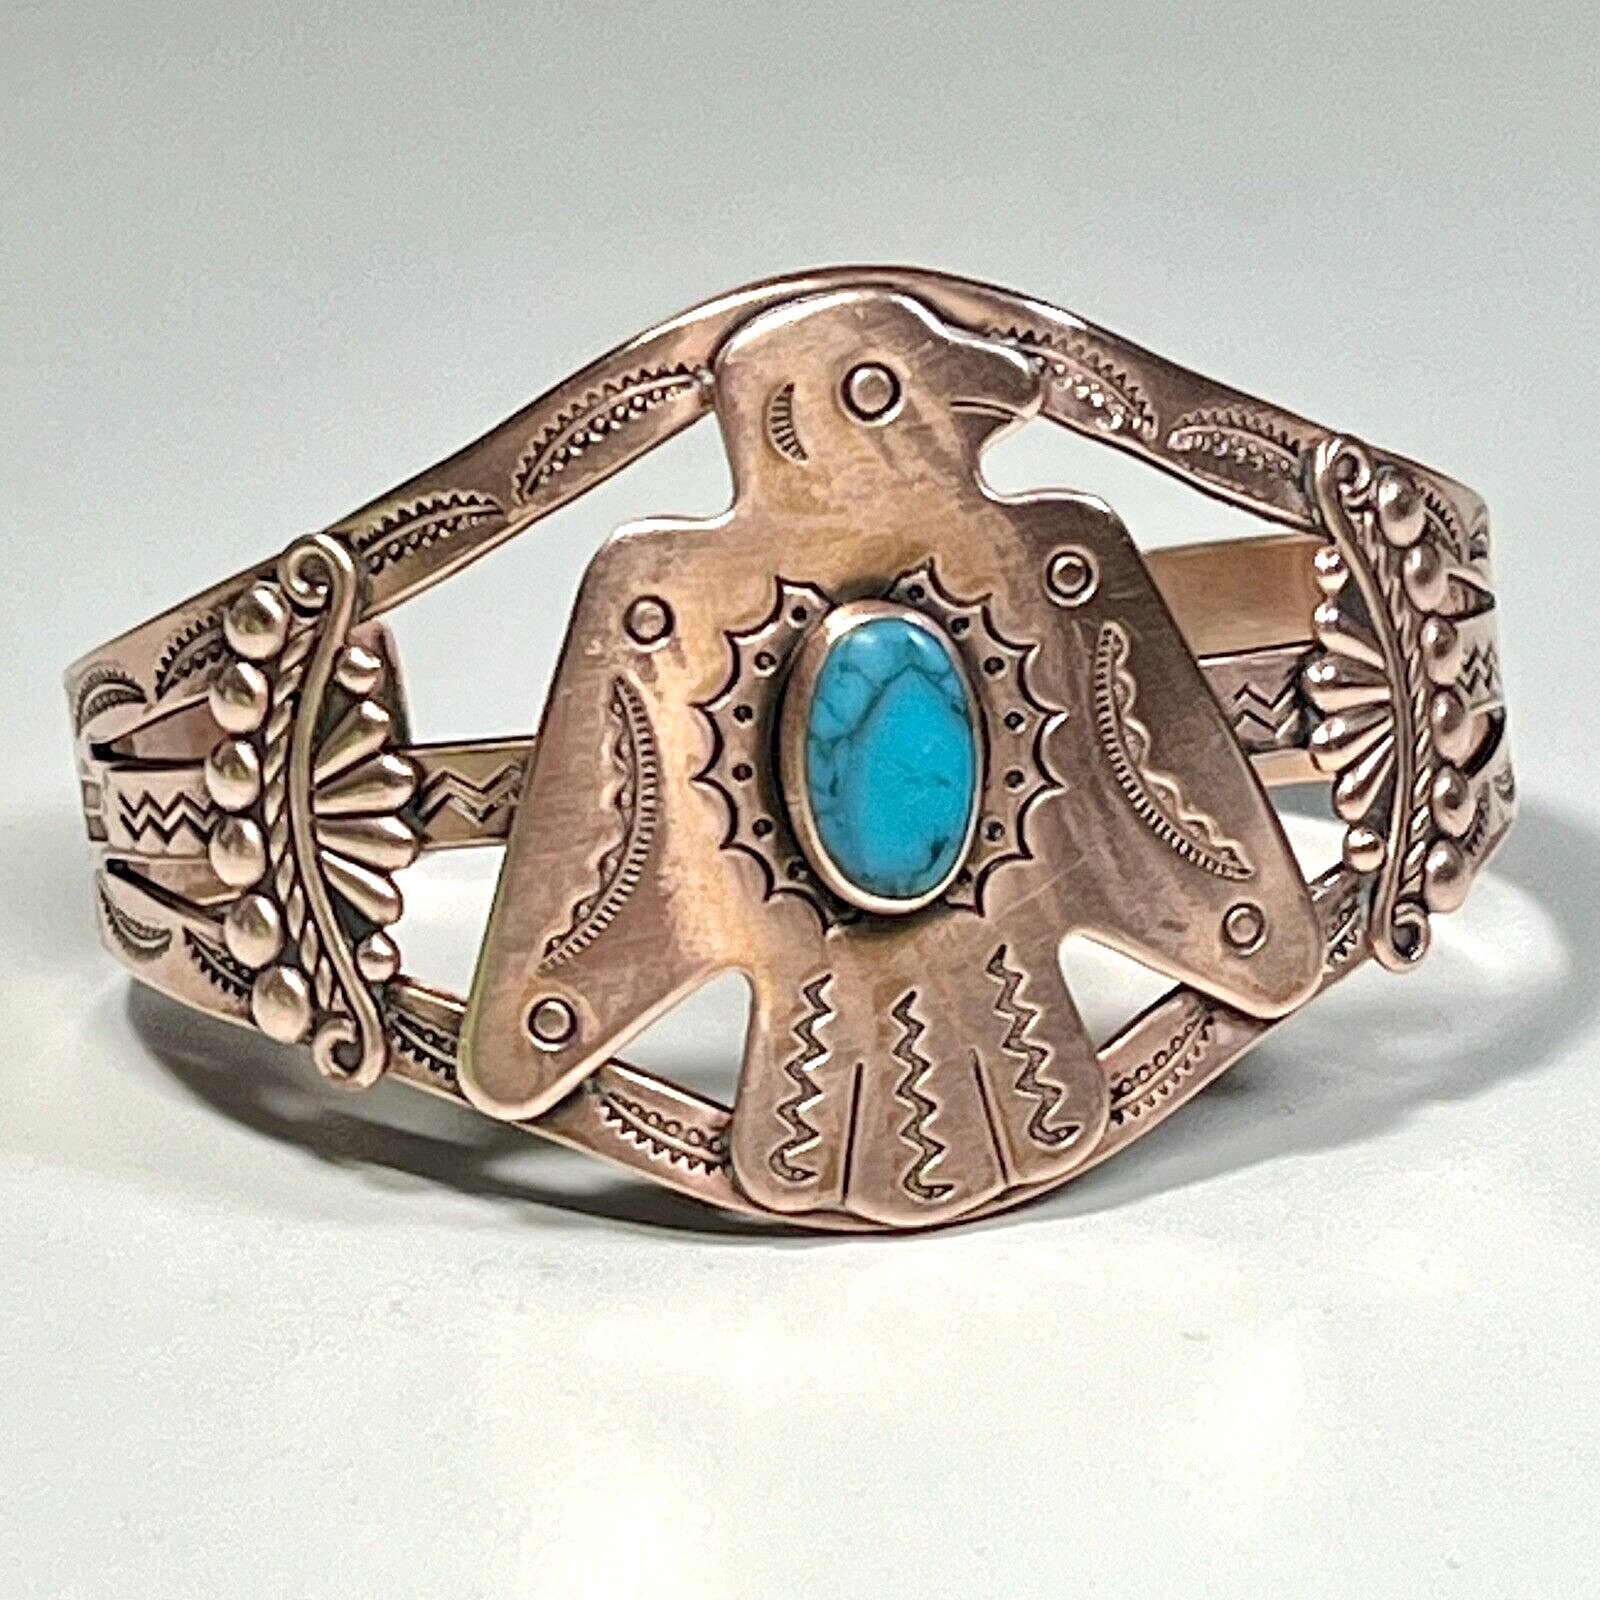 Copper Bell Trading Native American Thunderbird Turquoise Cuff Bracelet Vintage